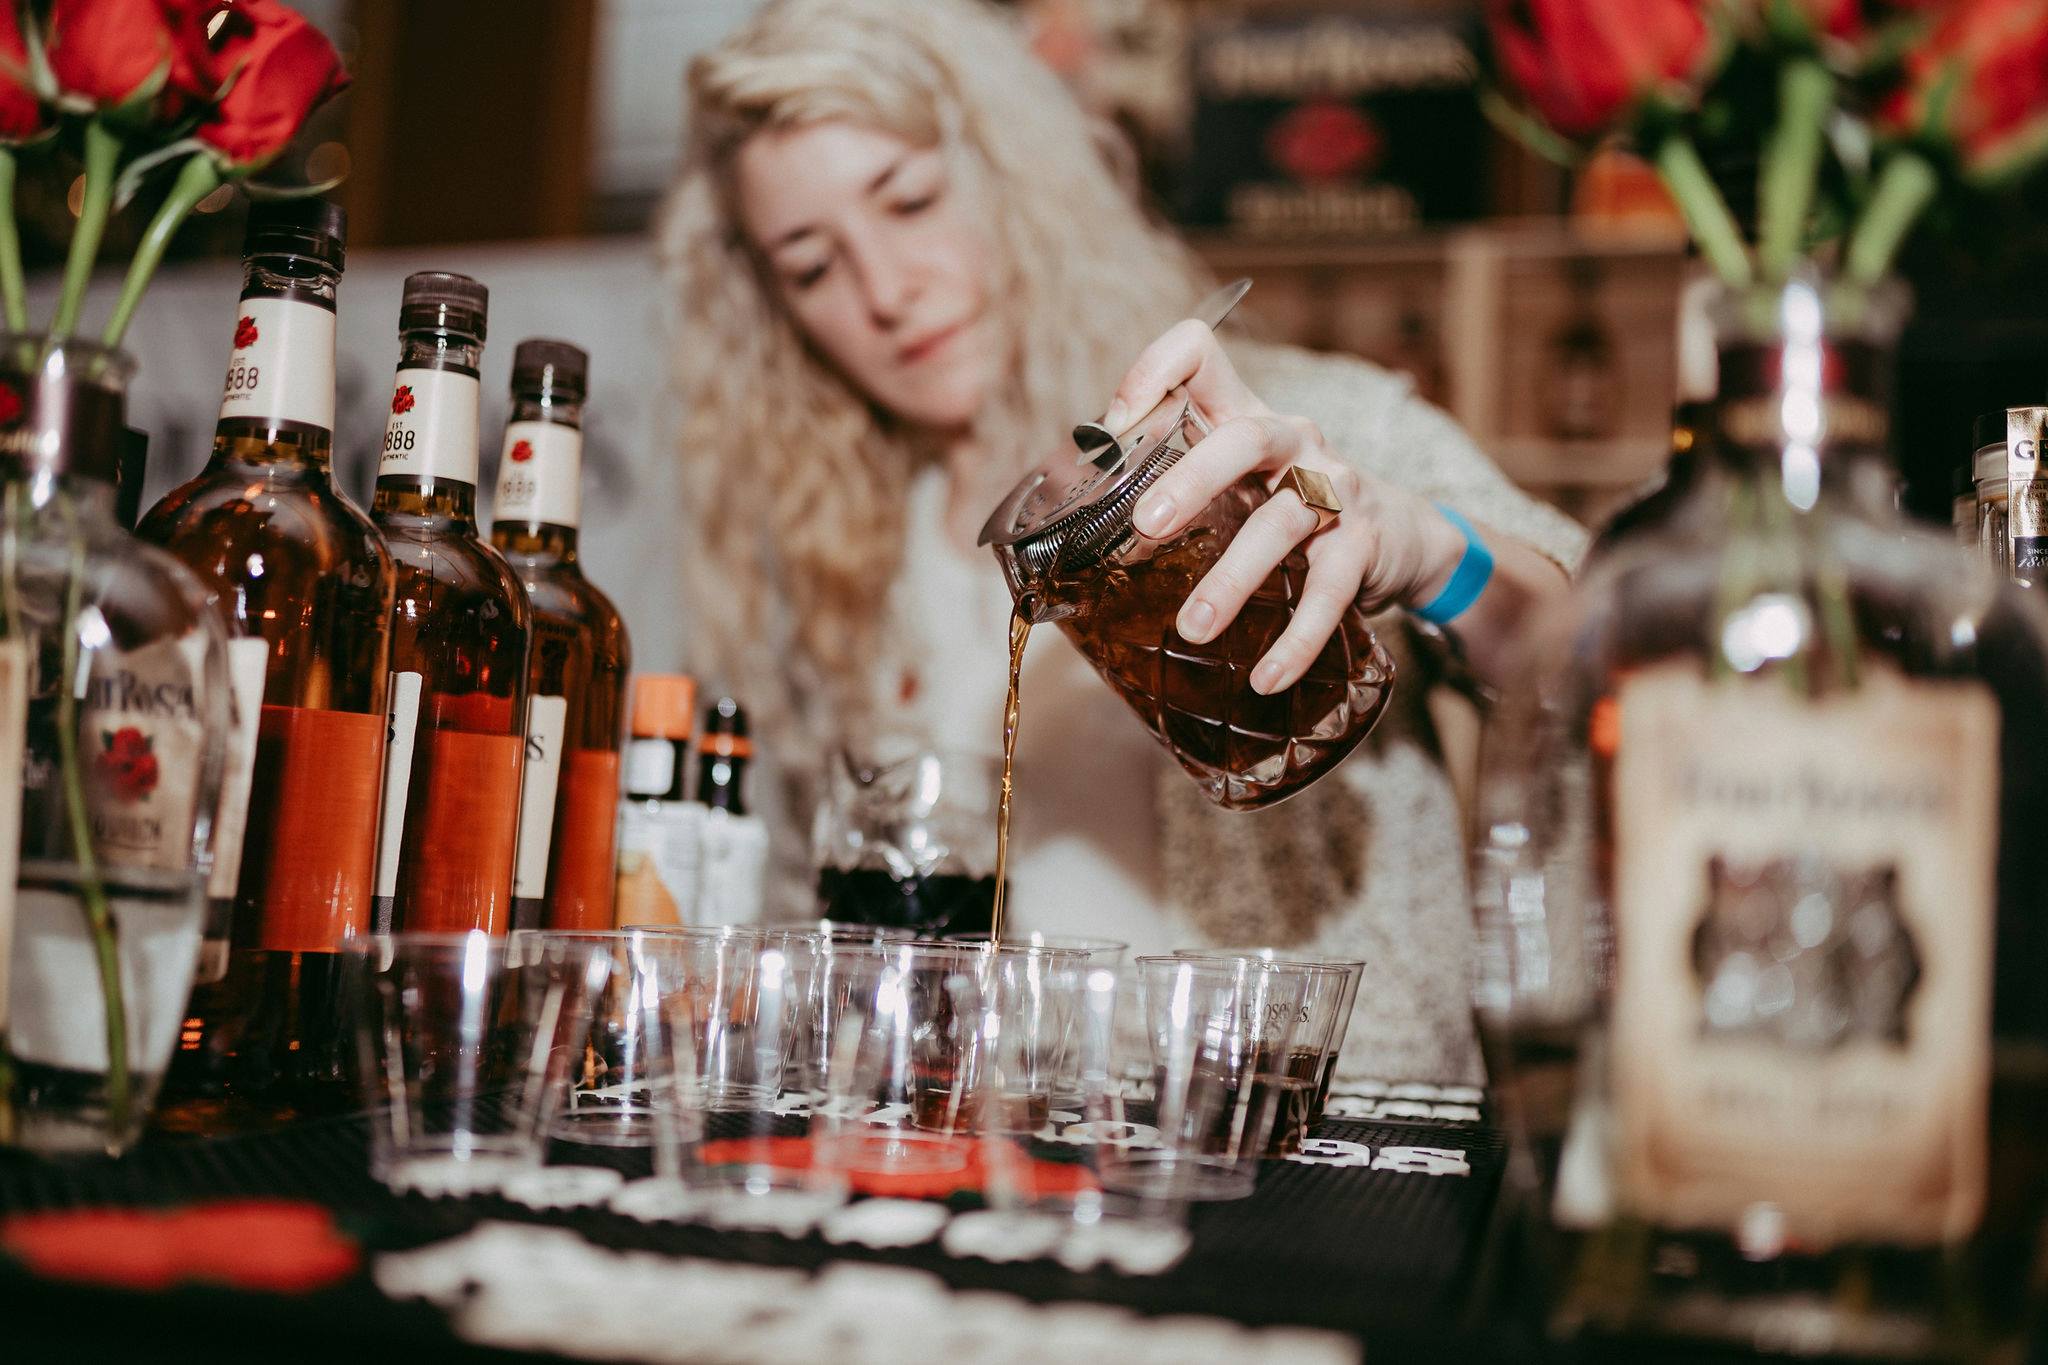 How To Make an Old Fashion at Whiskey Riot Festival